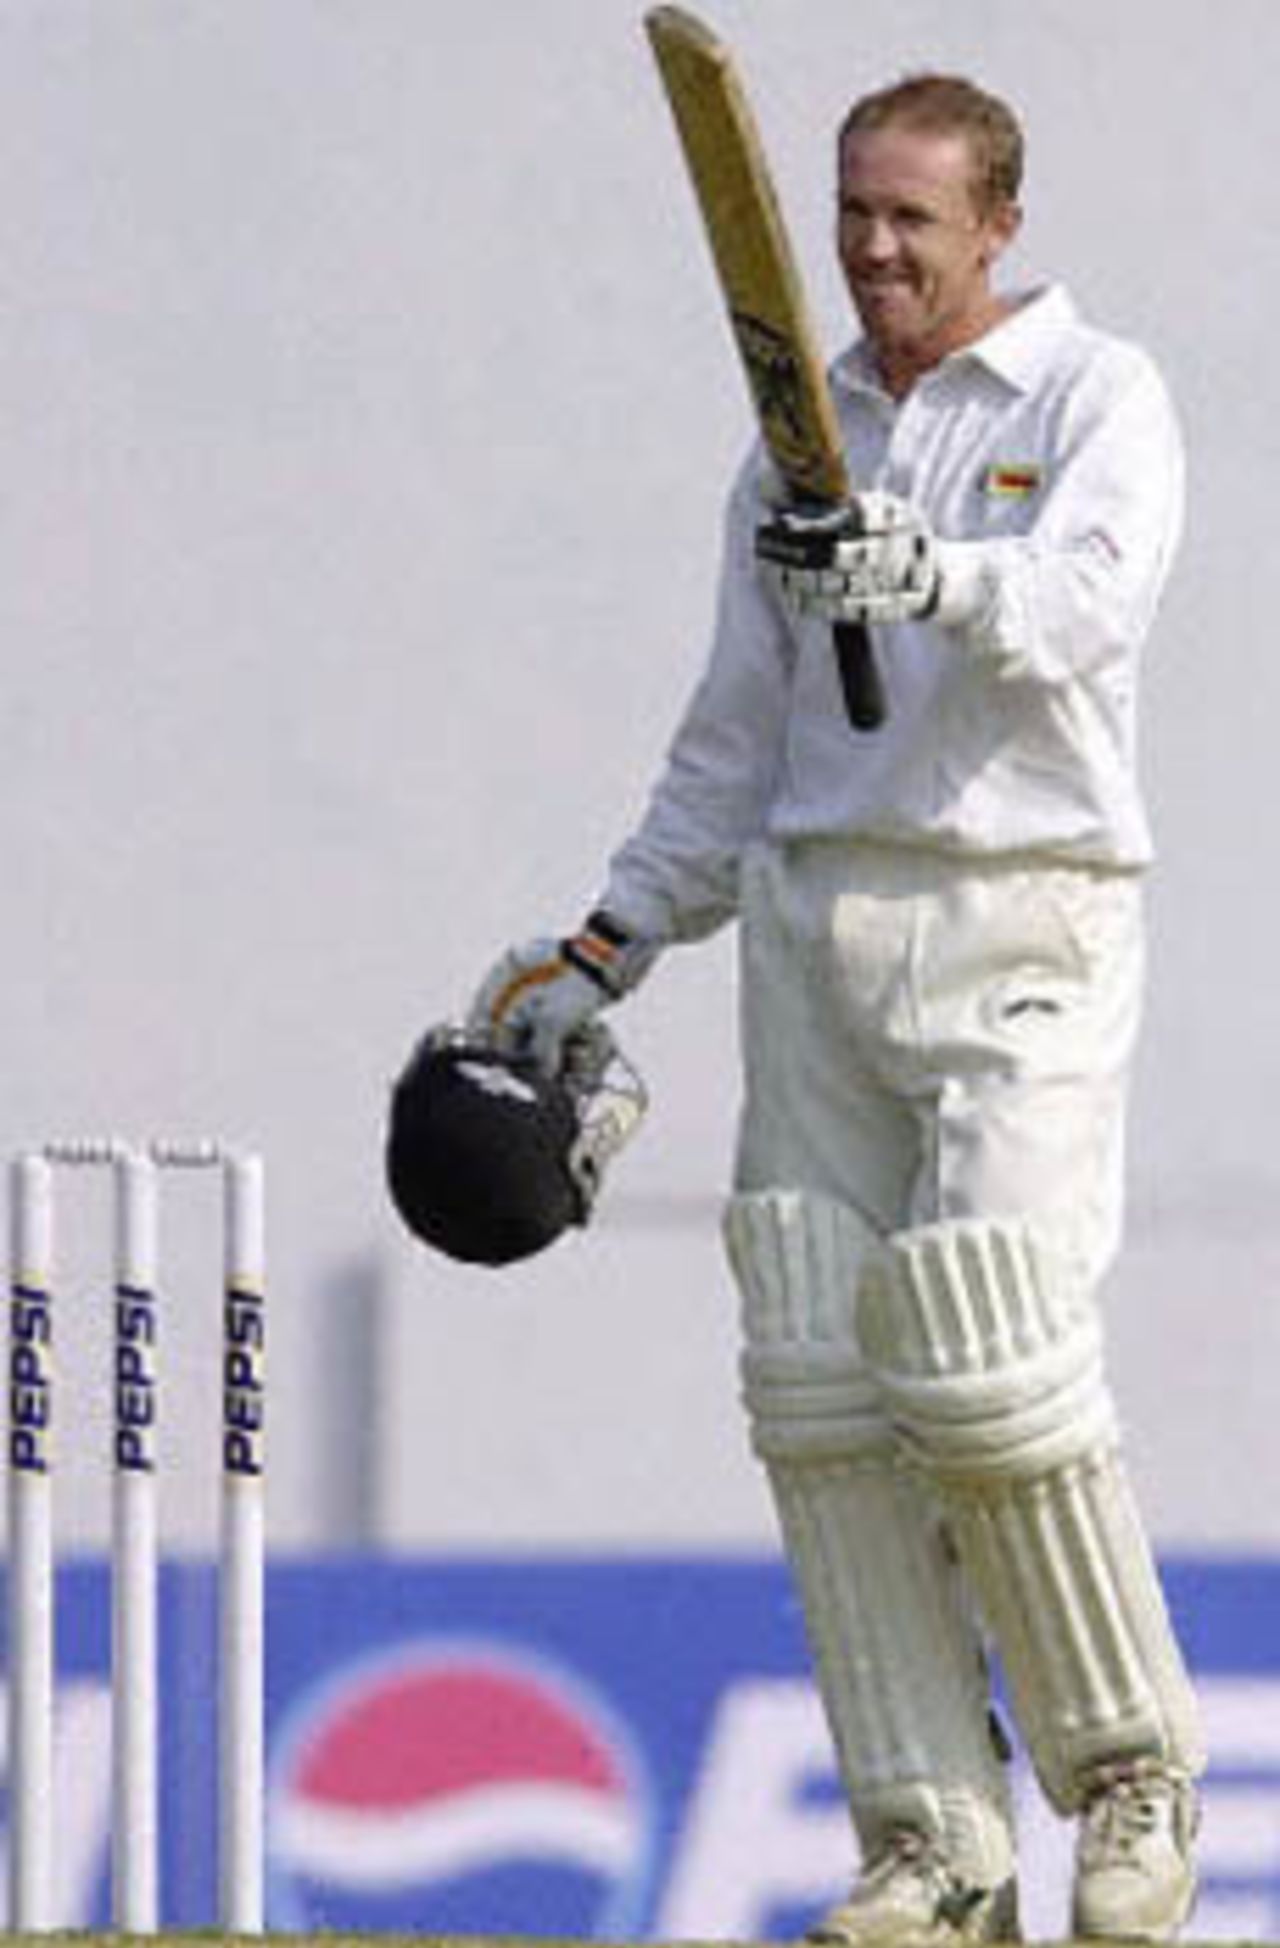 Andy Flower acknowledges the crowd as he reaches his century, Zimbabwe in India, 2000/01, 2nd Test, India v Zimbabwe, Vidarbha C.A. Ground, Nagpur, 25-29 November 2000 (Day 5).